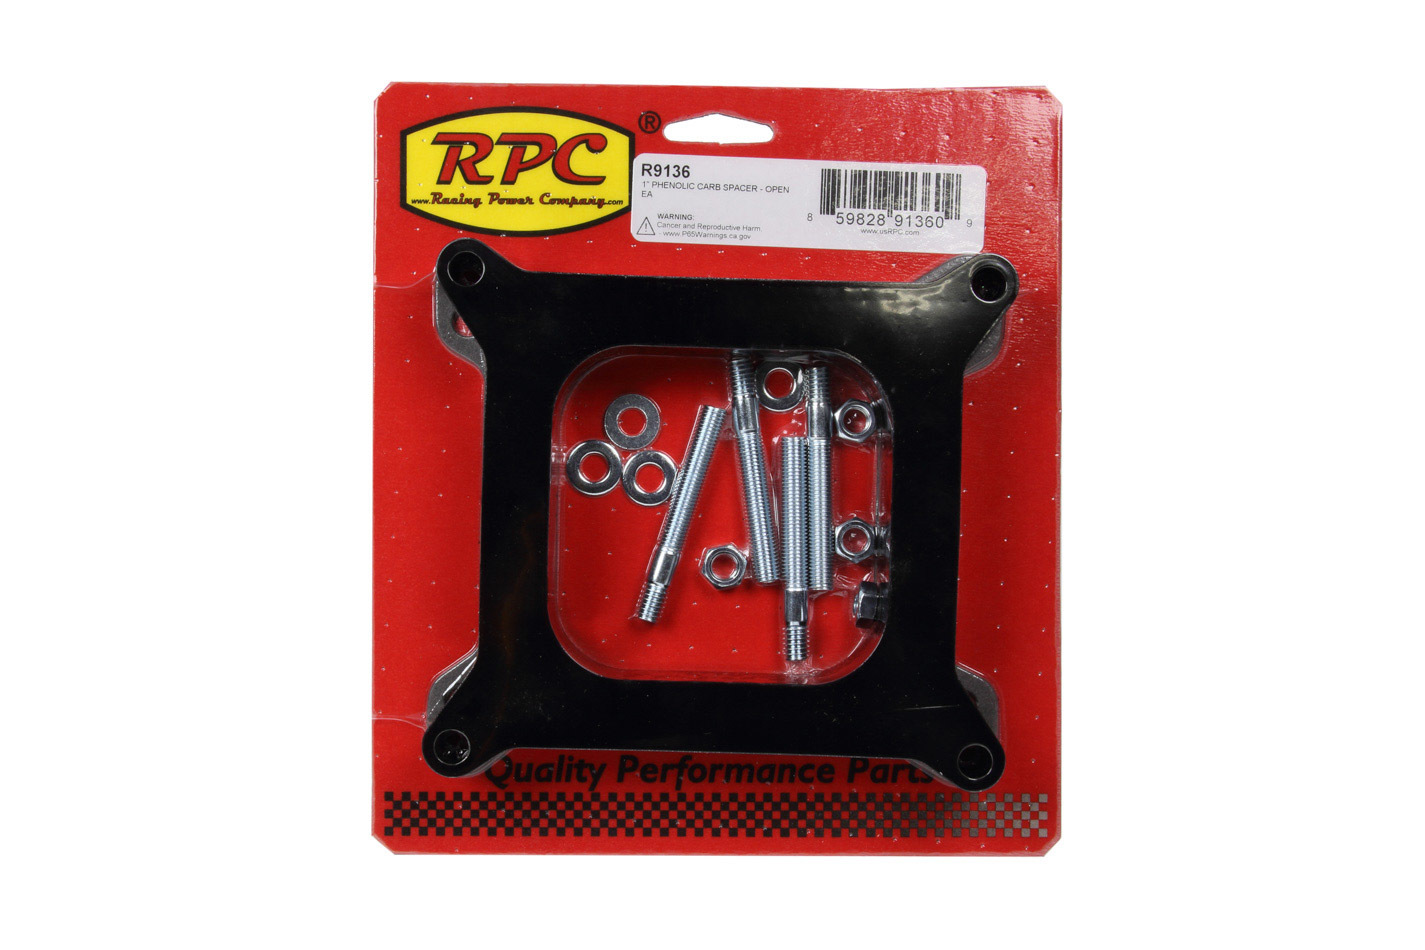 Racing Power Company R9136 - 1In Phenolic Carb Space r - Open